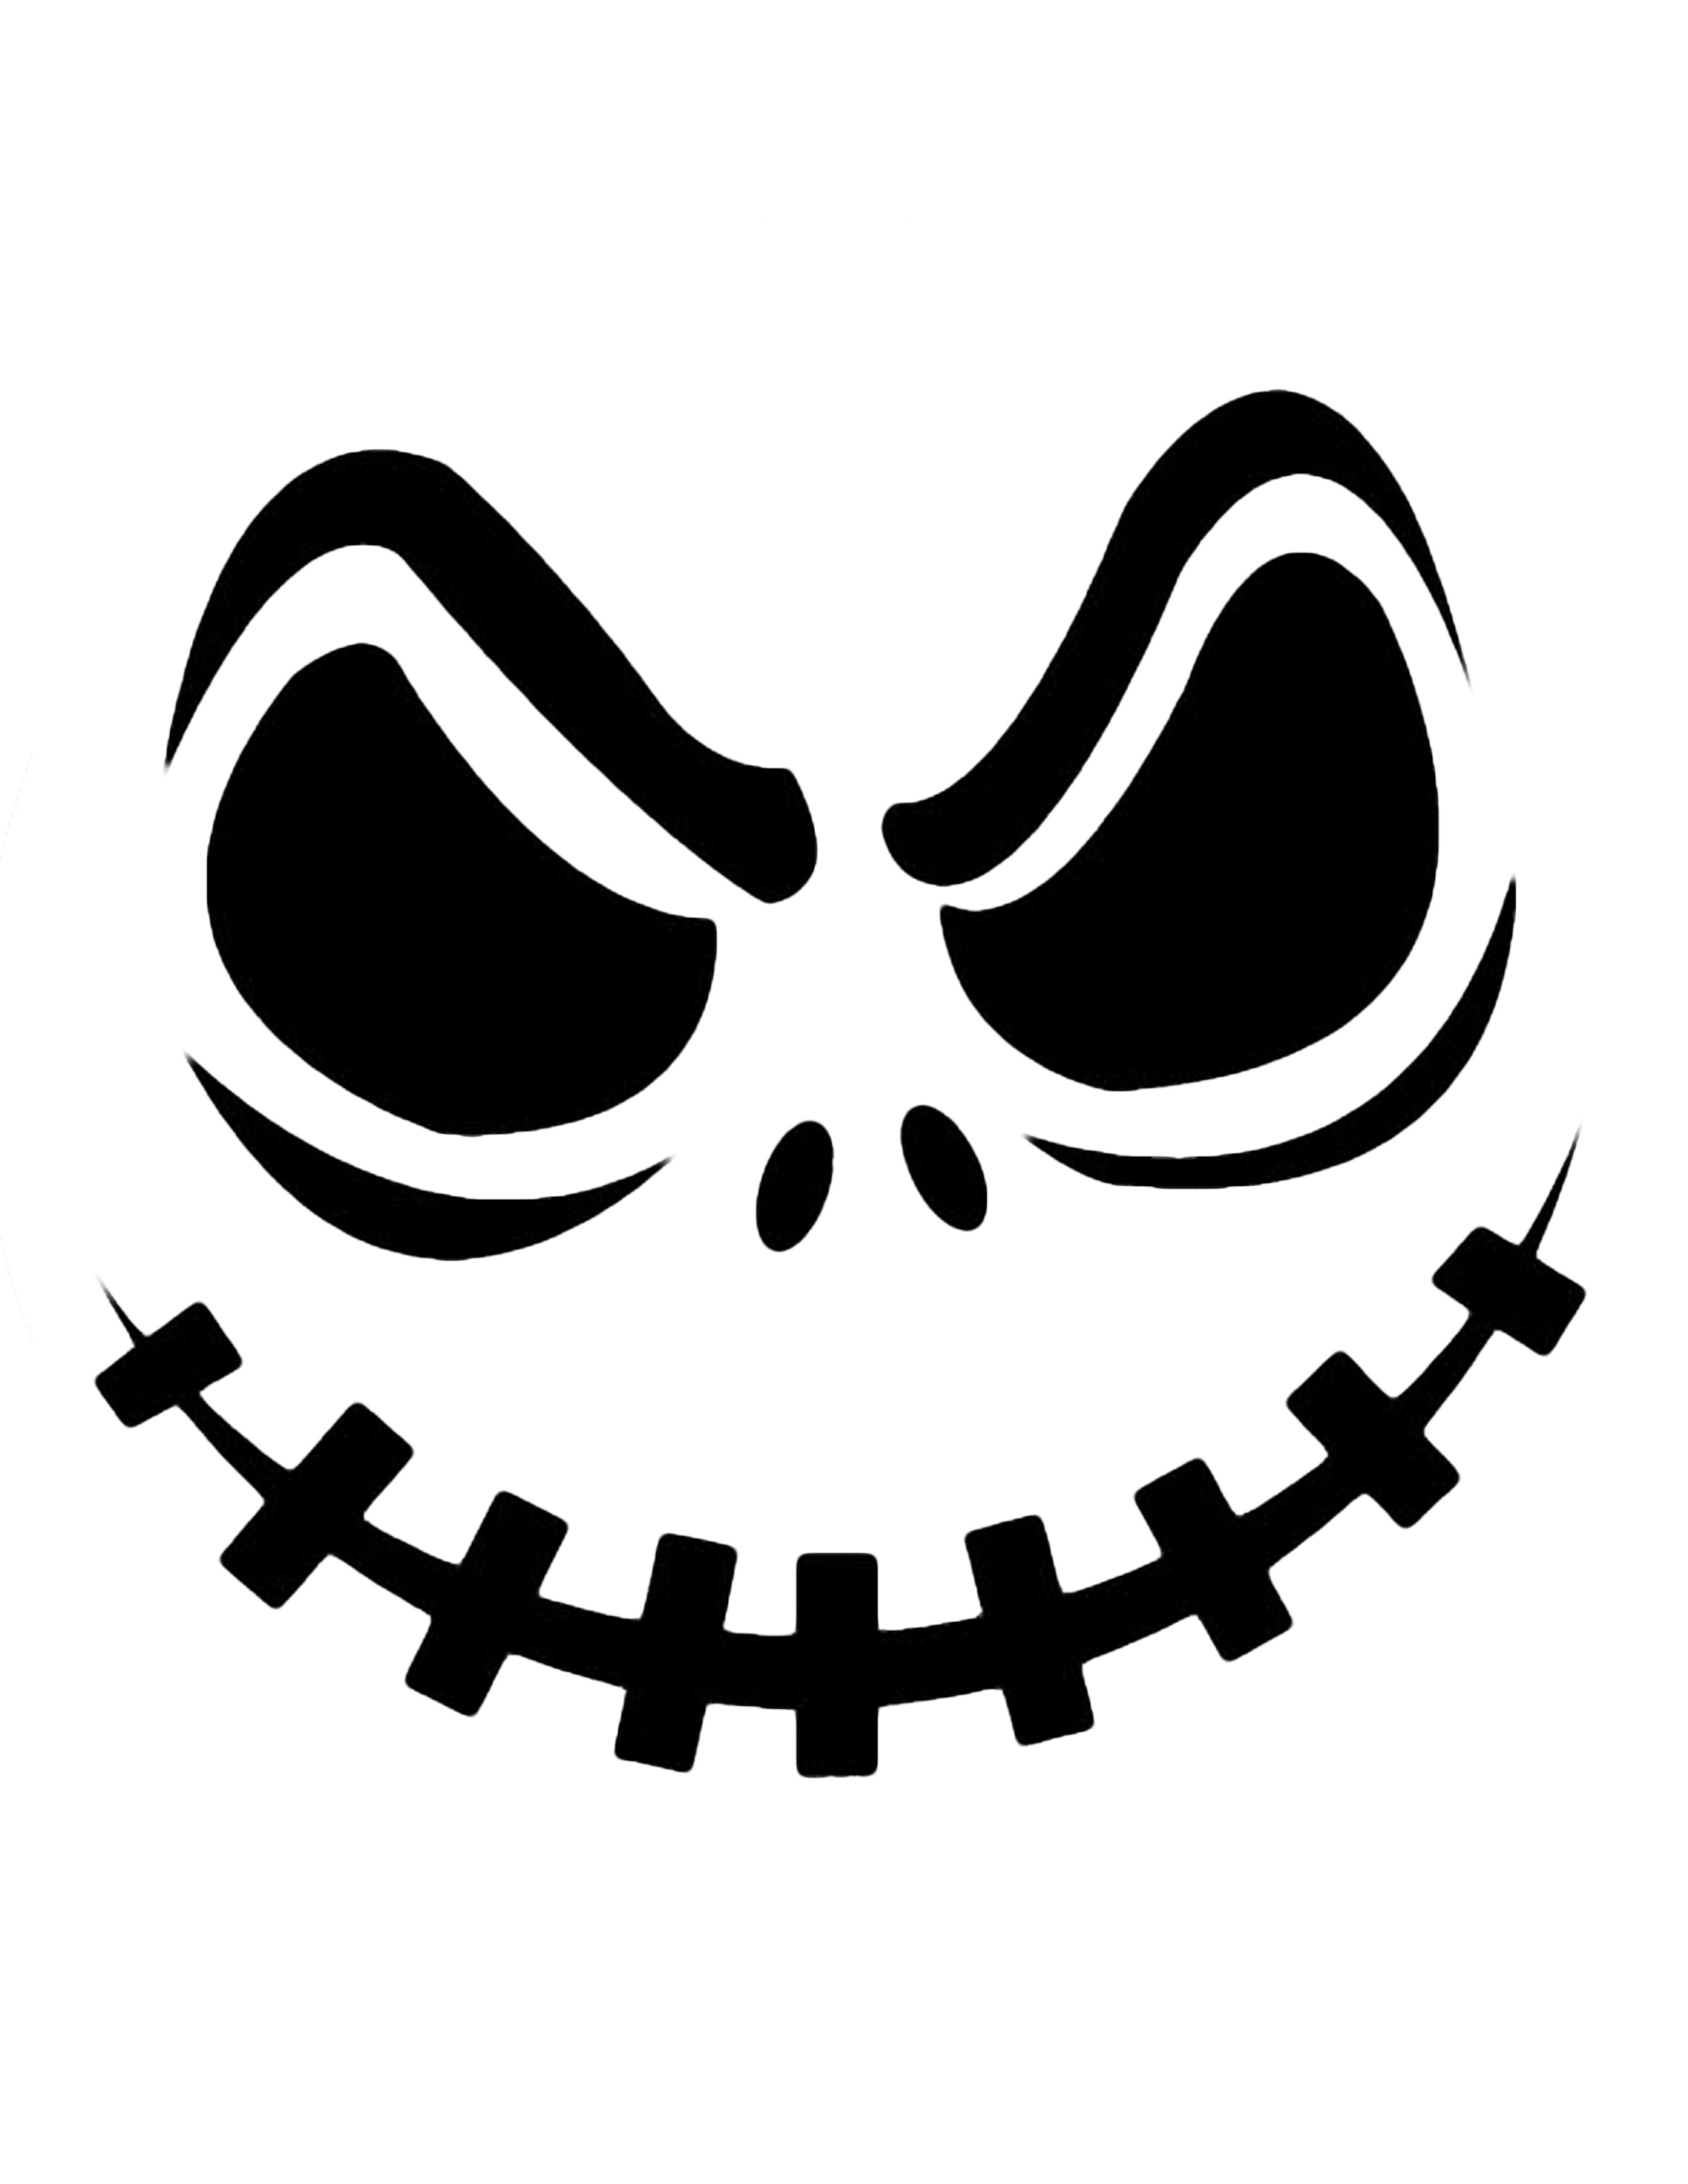 Halloween  black and white interesting halloween pumpkin carving patterns design with carved clipart